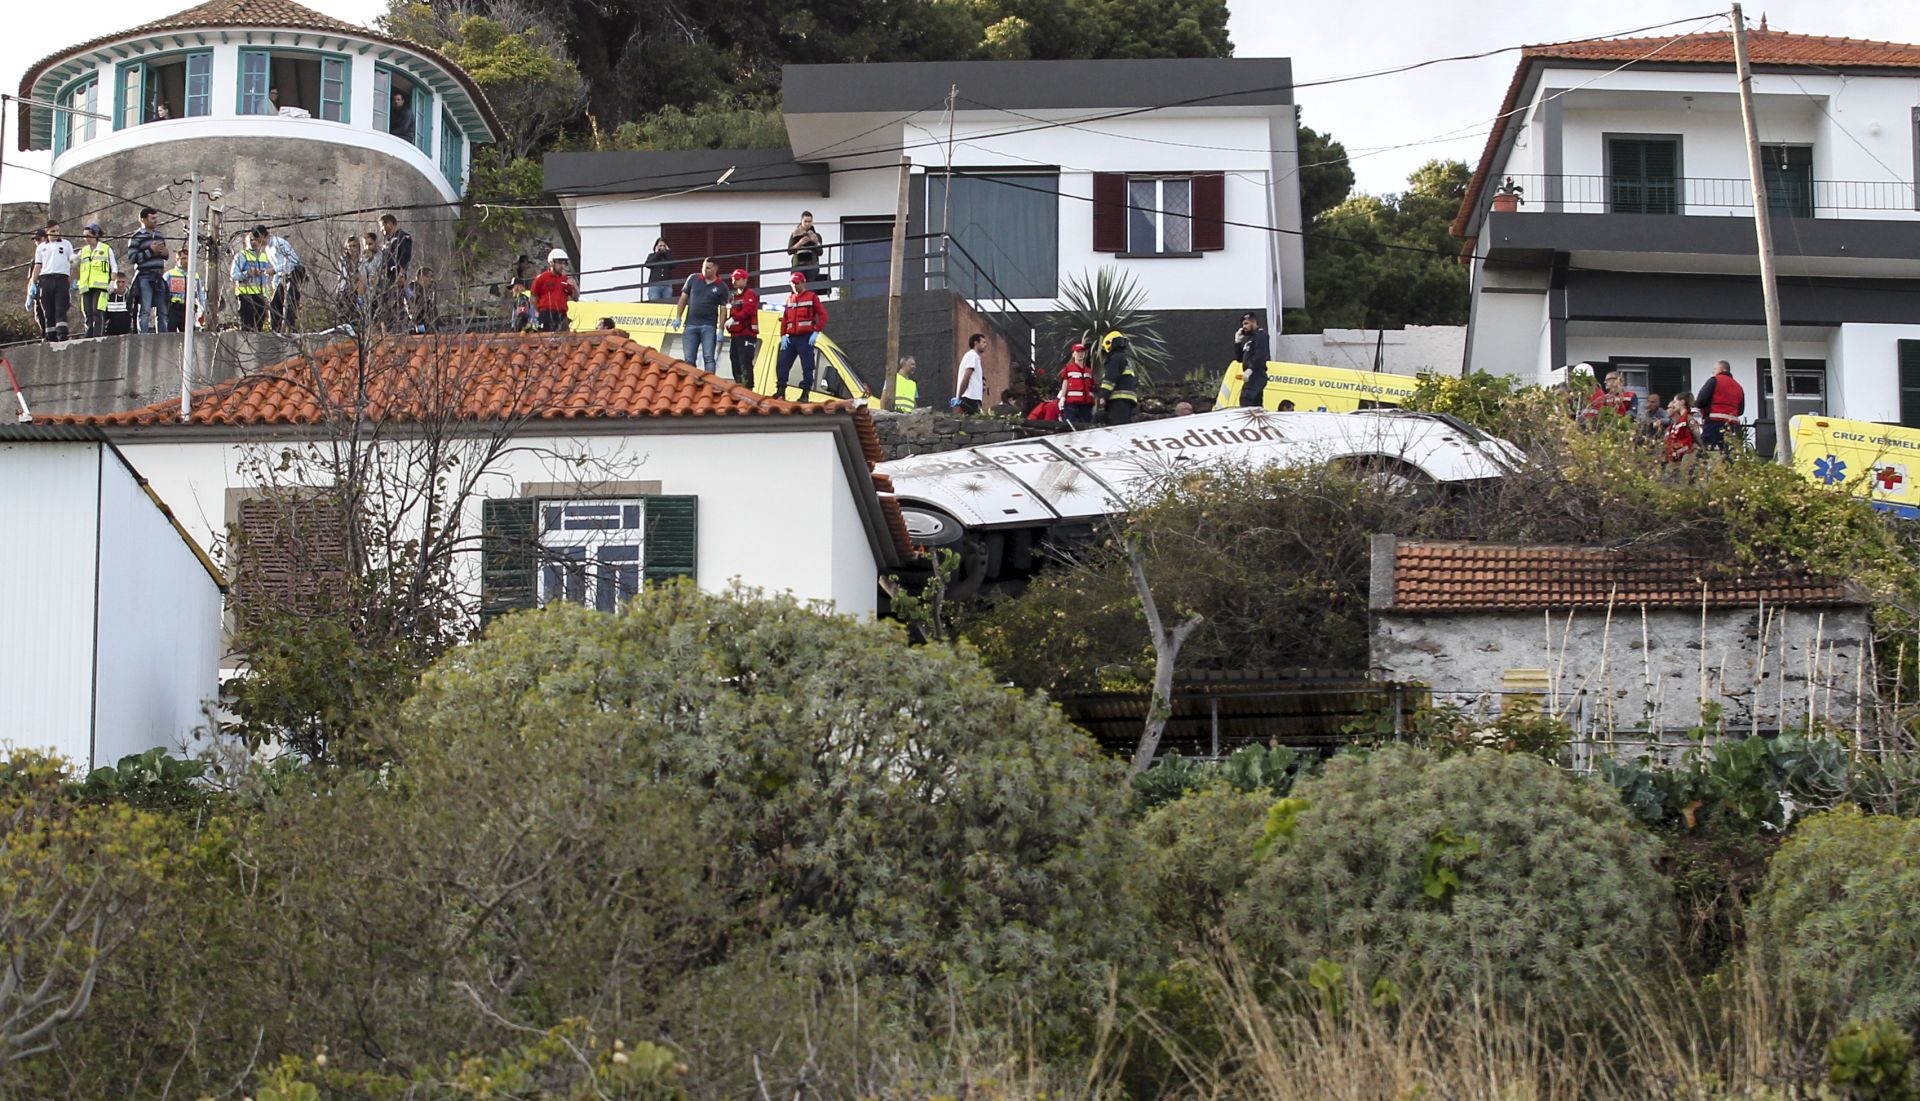 epa07512747 Emergency services inspect the scene of a tourist bus crash in Canico, Santa Cruz, Madeira Island, Portugal, 17 April 2019. According the Civil Protection of Madeira, several people died in the accident.  EPA/HOMEM GOUVEIA